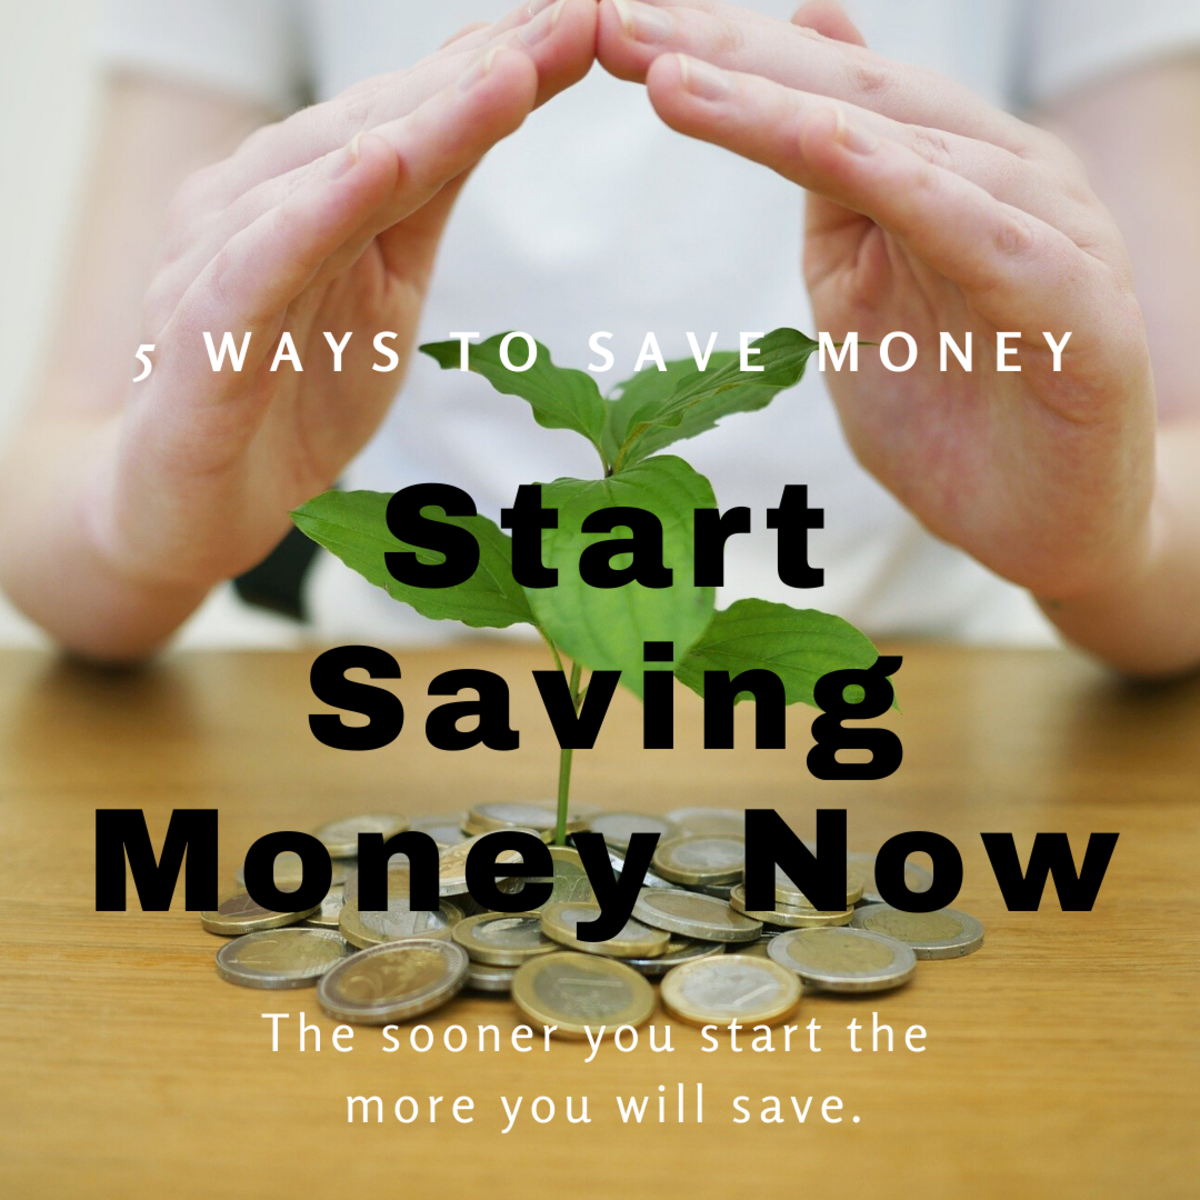 example essay how to save money